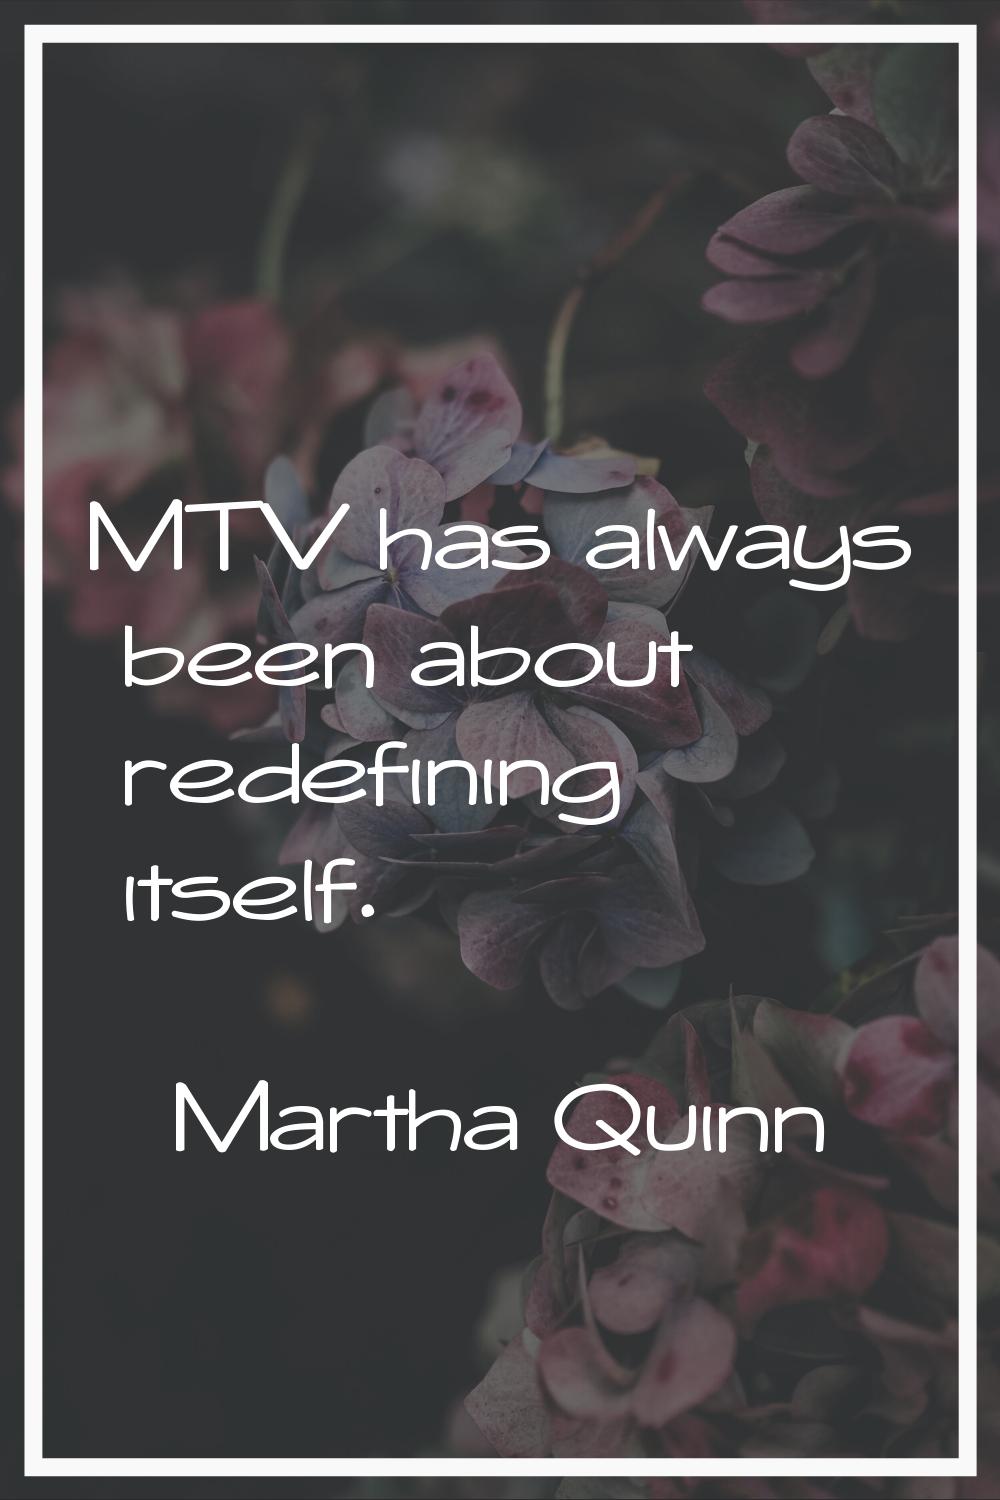 MTV has always been about redefining itself.